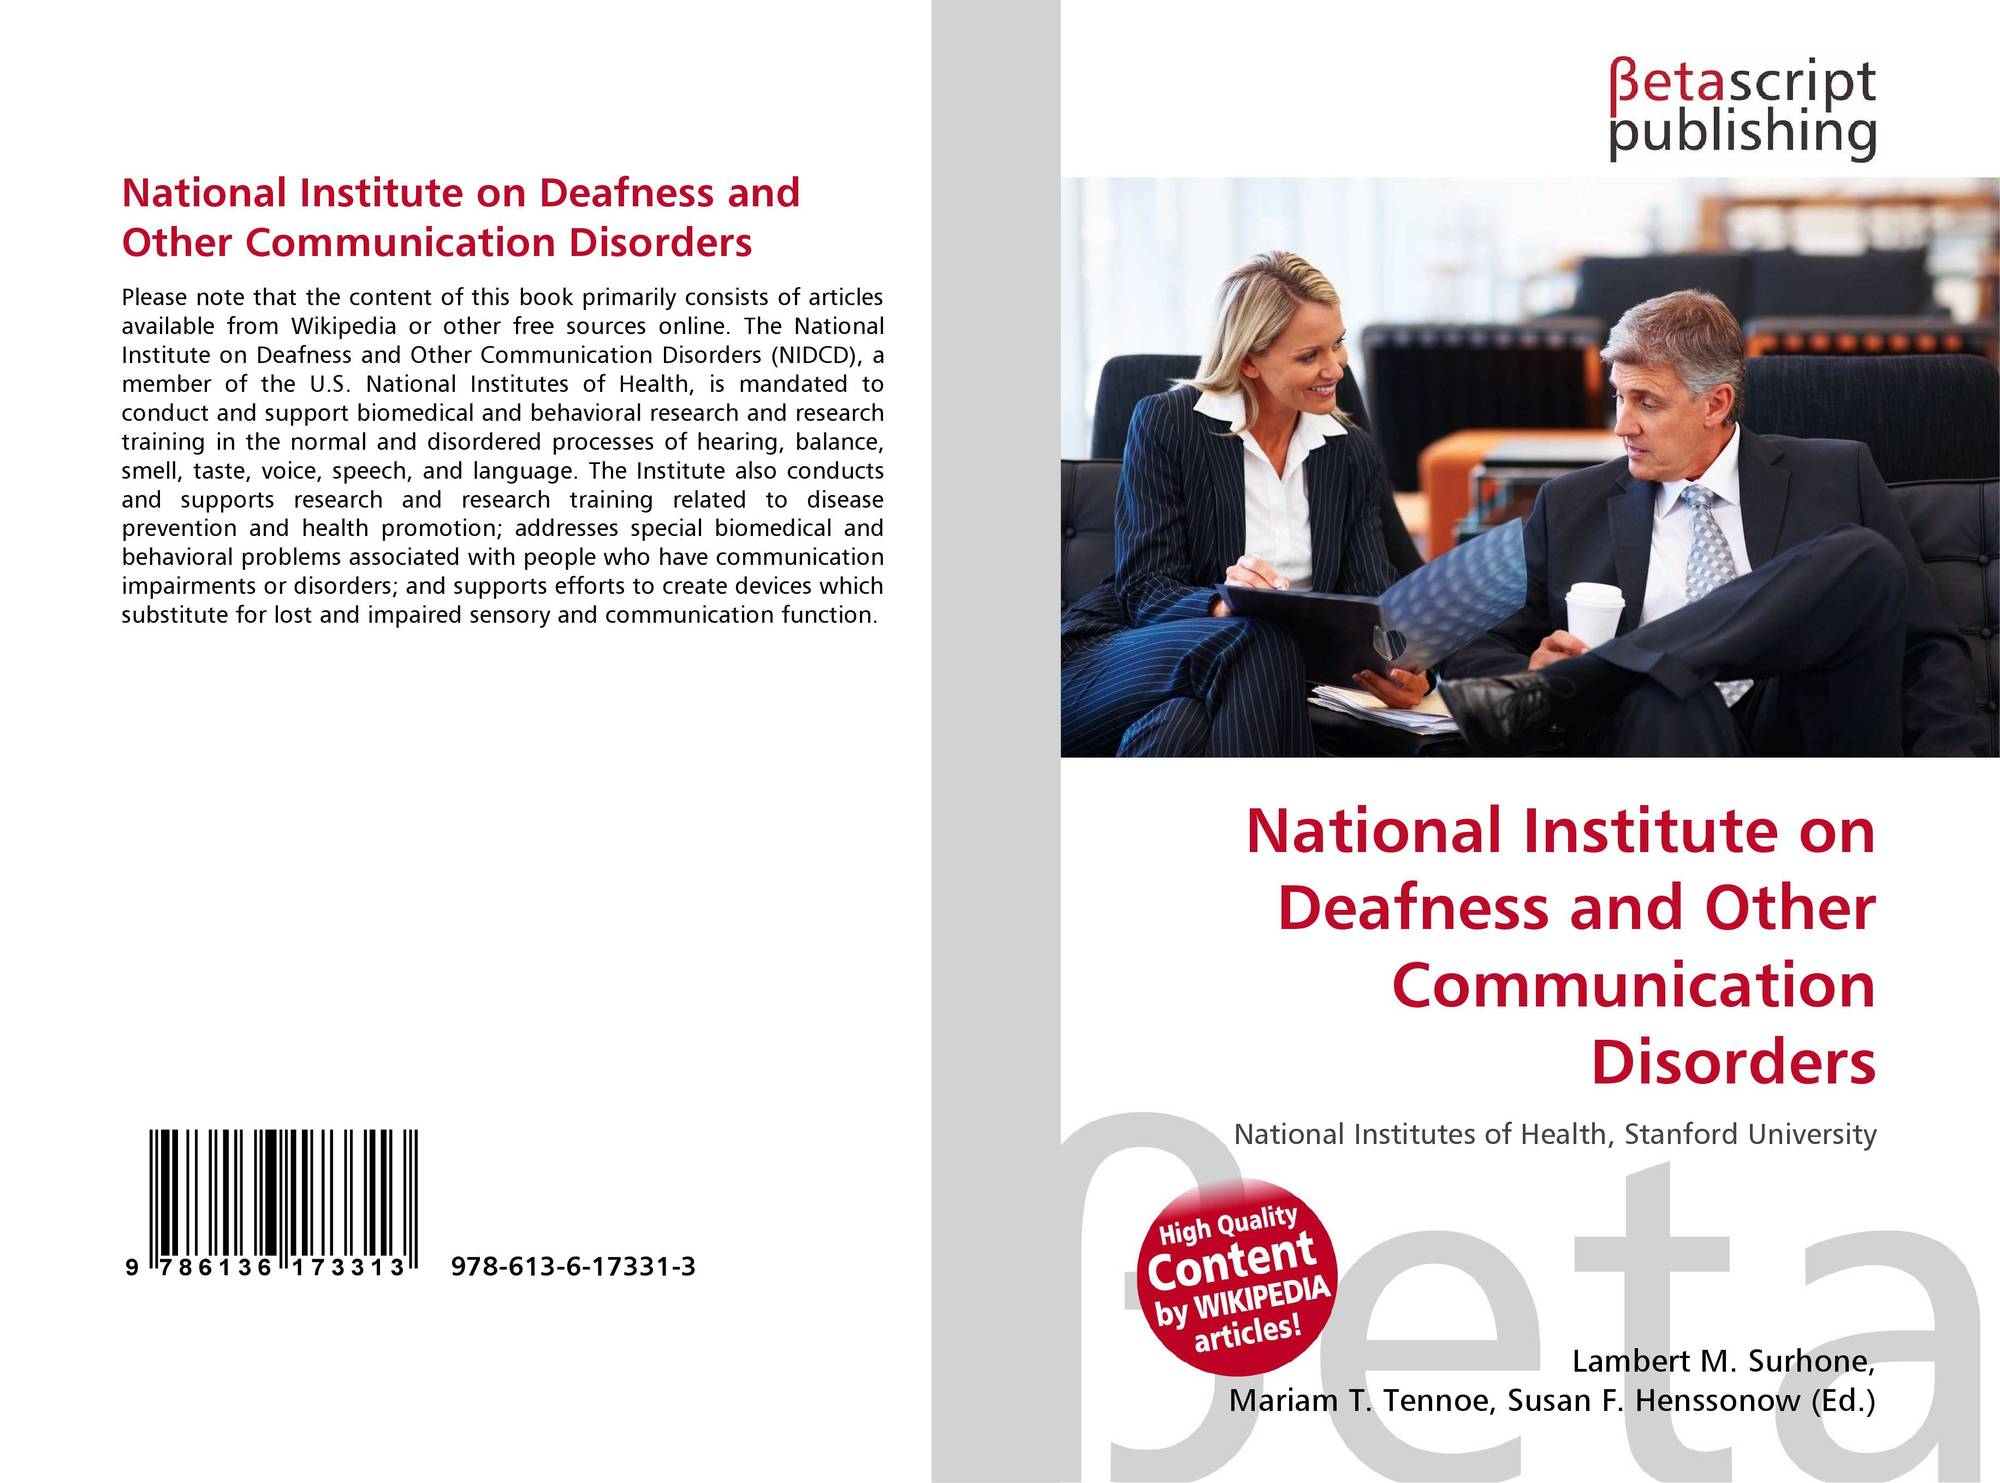 The National Institute Of Deafness And Other